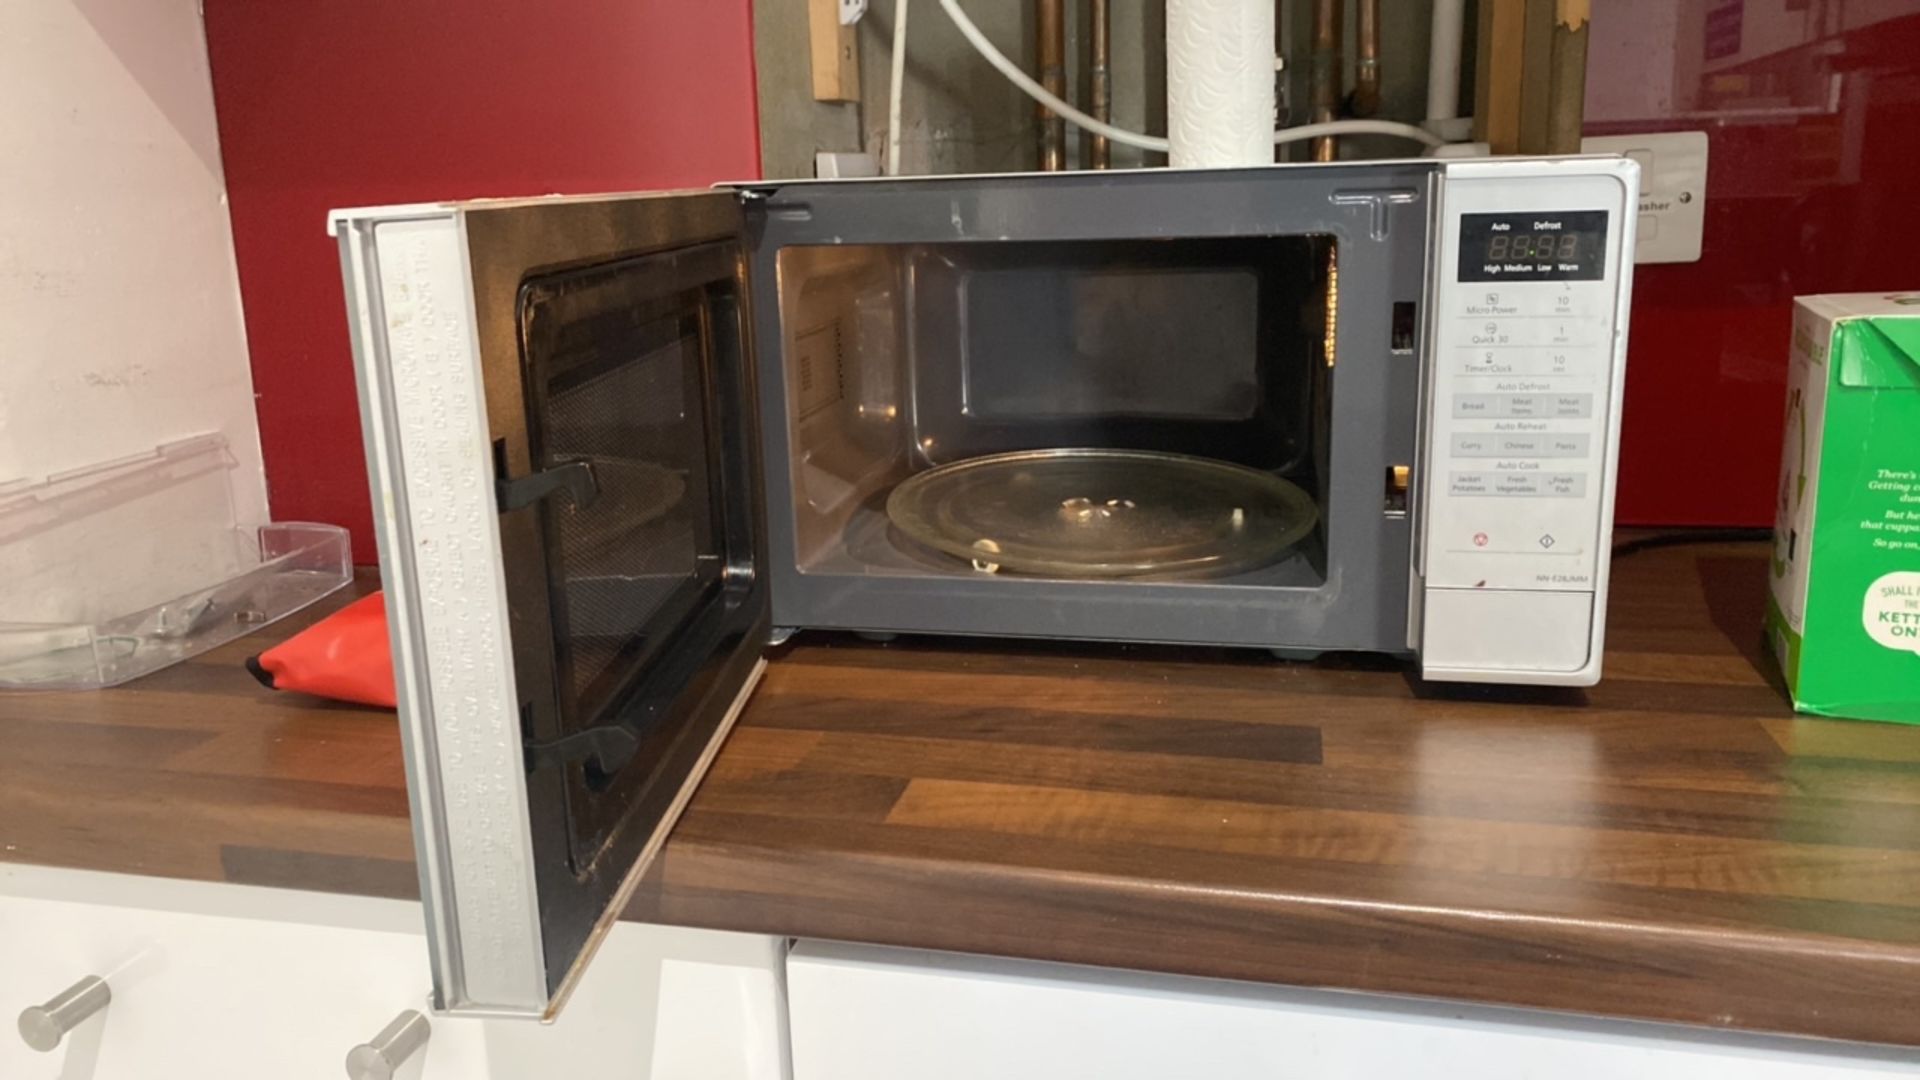 Microwave X2 and Kettle - Image 5 of 7